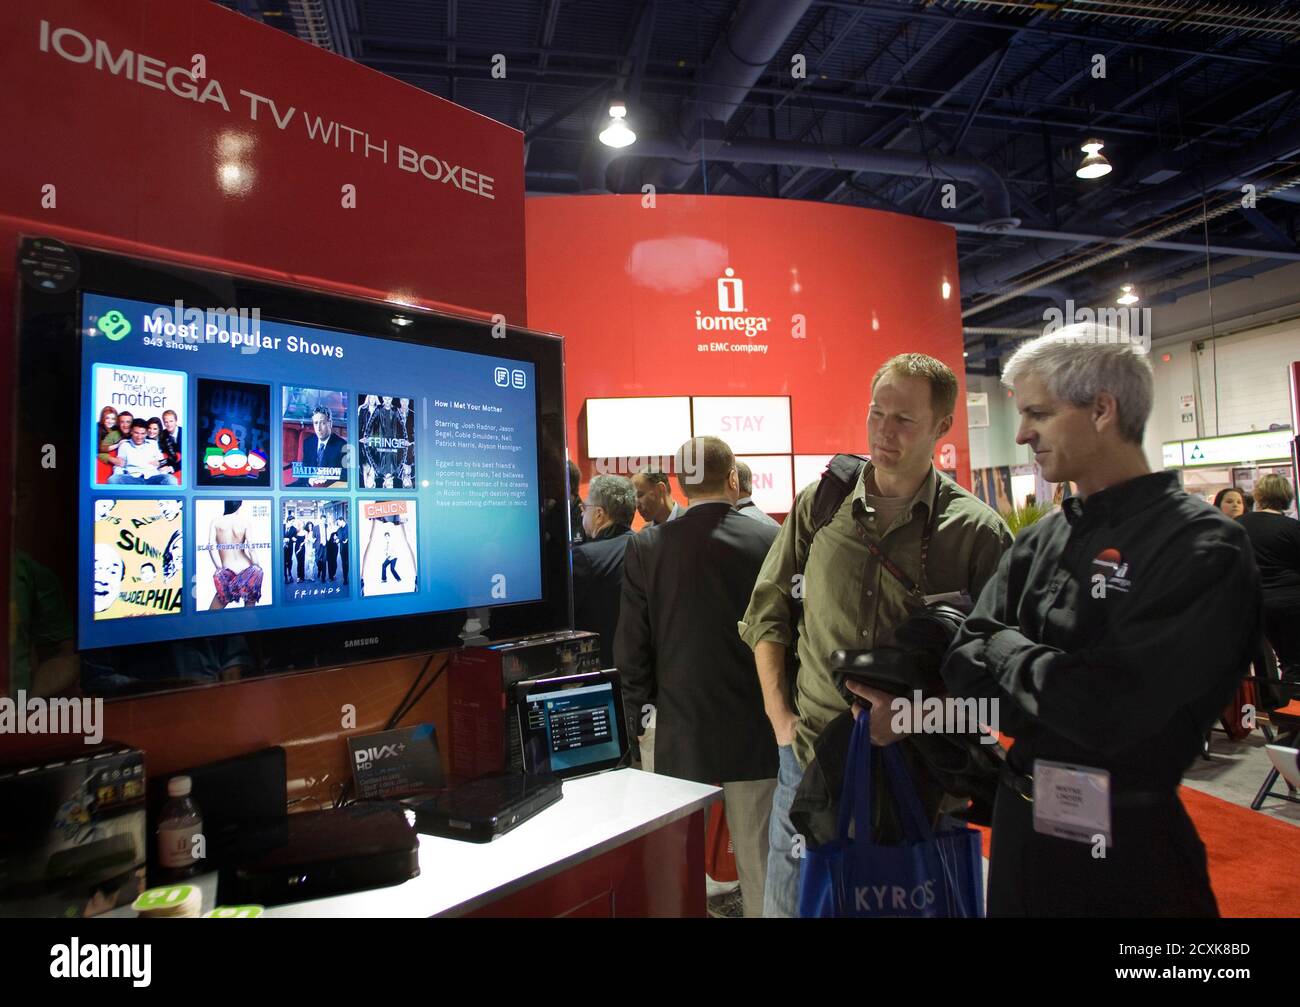 Iomega TV with Boxee devices are displayed during the 2011 International  Consumer Electronics Show (CES) in Las Vegas, Nevada January 7, 2011. The  network-attached storage devices, which range from diskless ($229) to